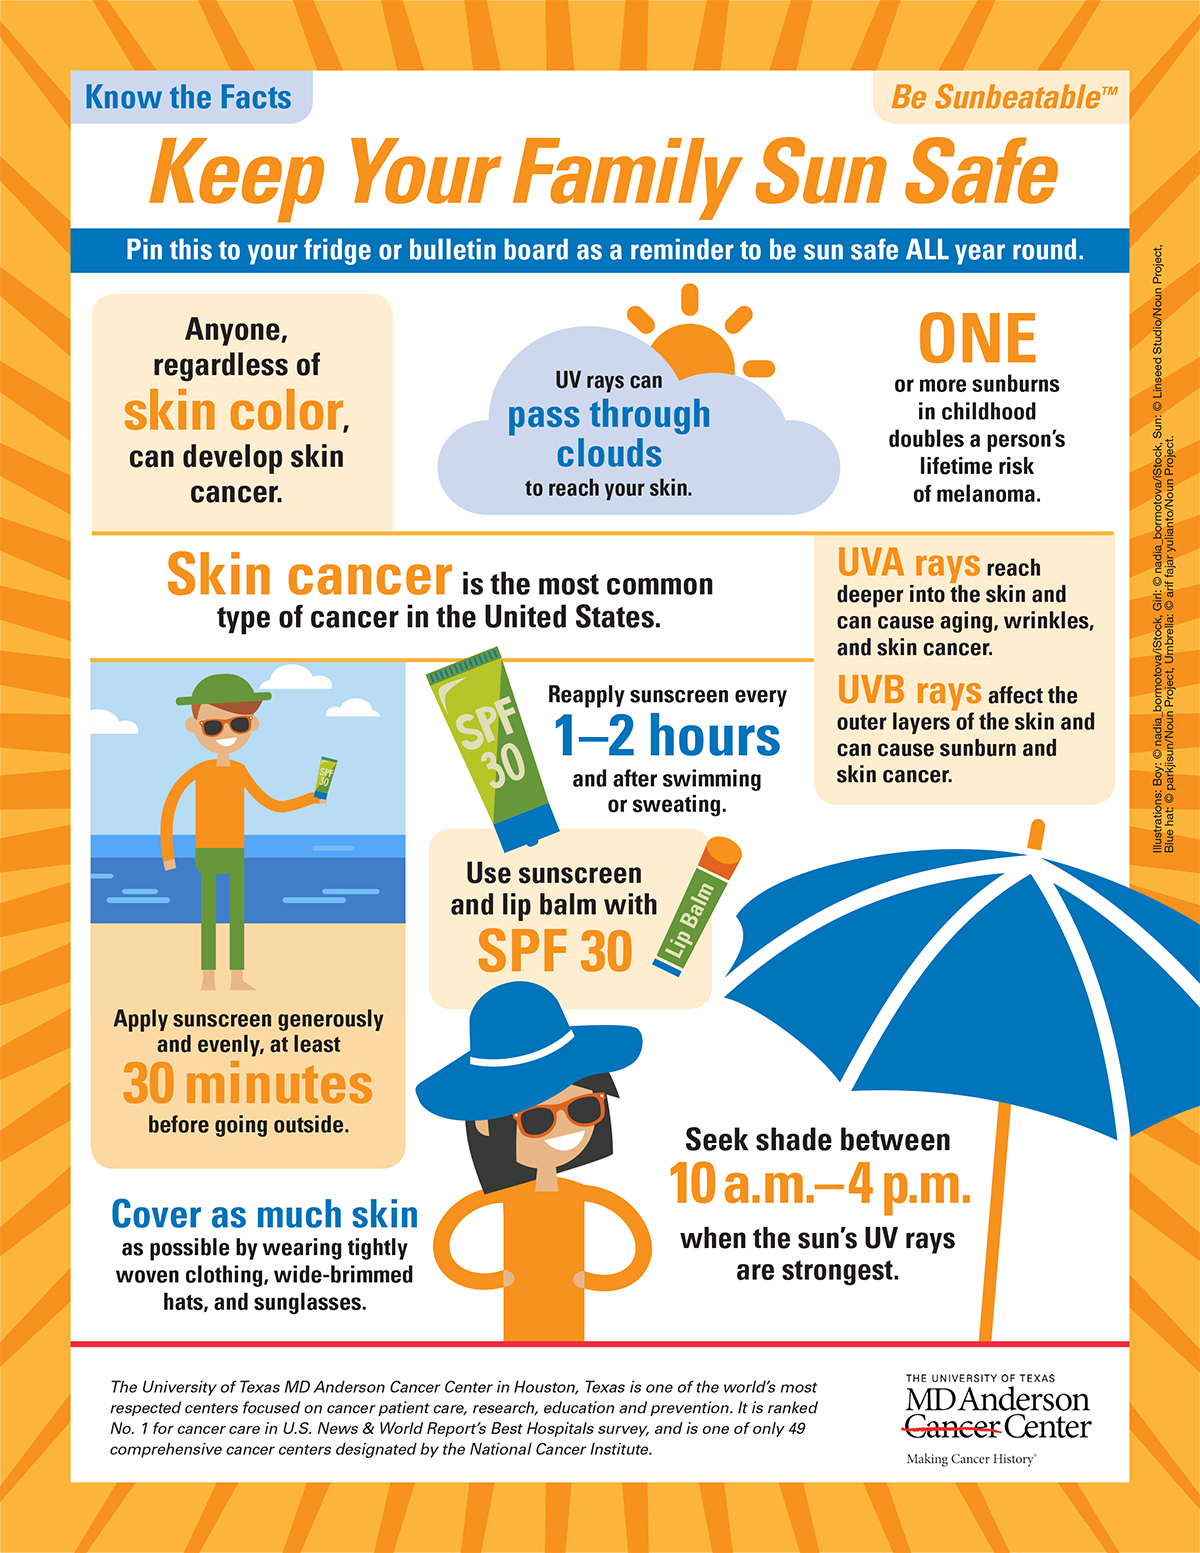 A “Don't Fry Day” Reminder: 5 Tips to Stay Sun-Safe! - CATCH